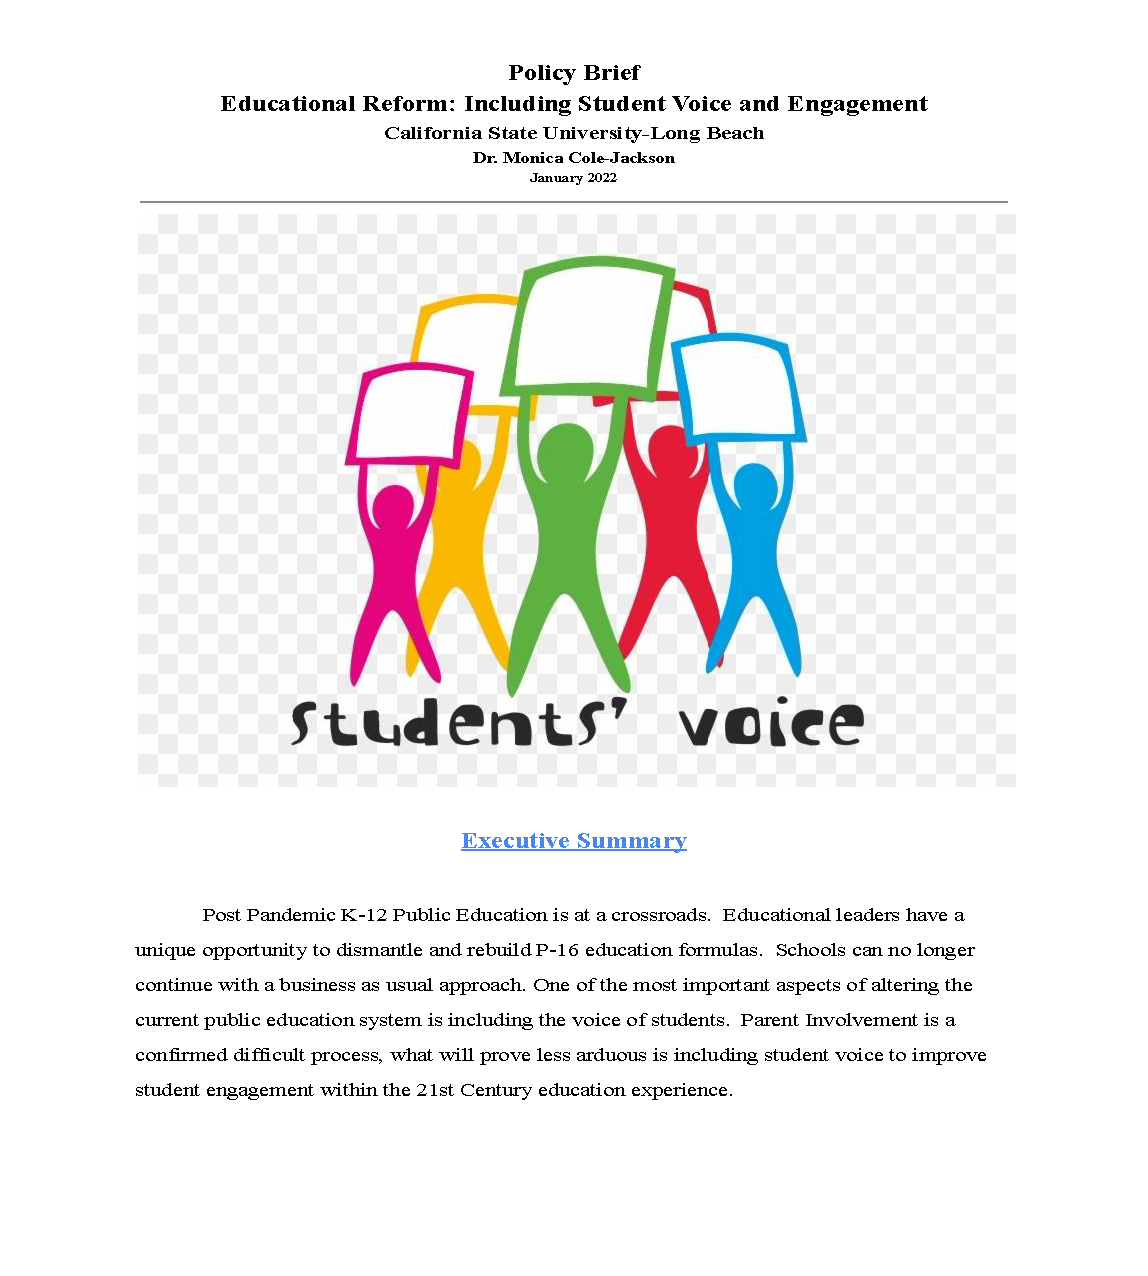 Educational Reform: Including Student Voice and Engagement 1